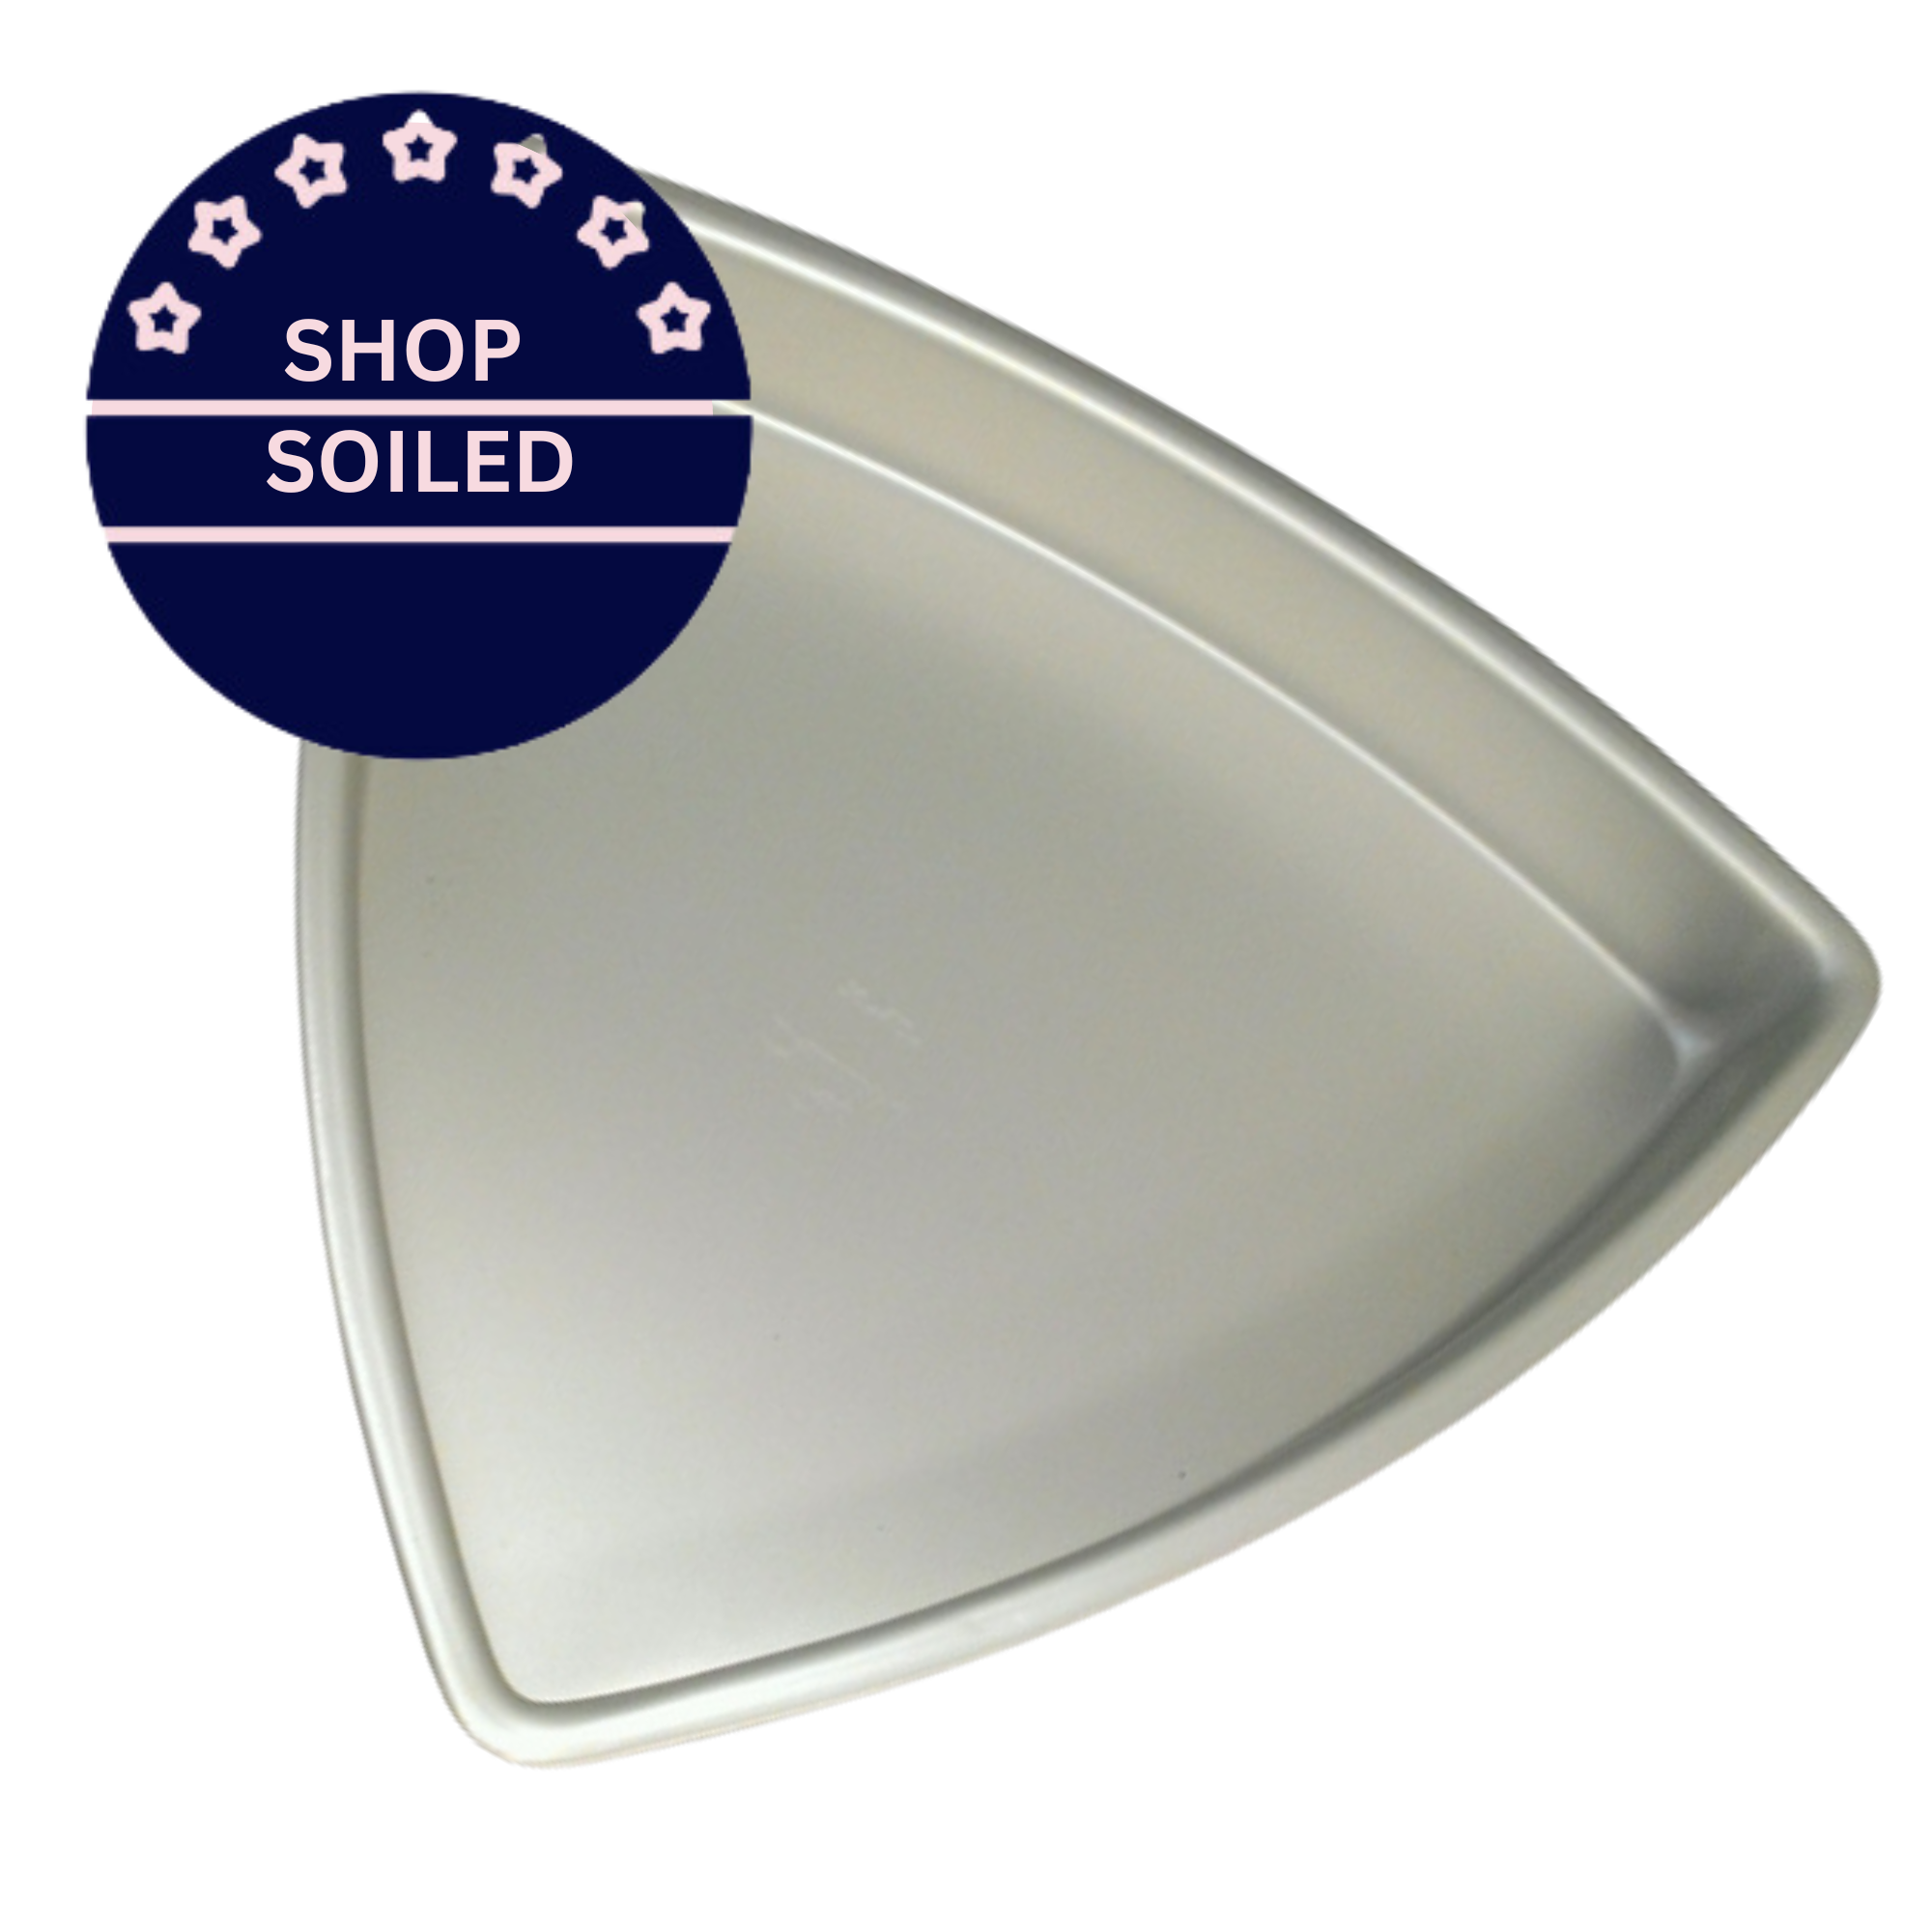 SHOP SOILED - Fat Daddio's from Silverwood Professional Silver Anodised Baking Tin Pan - Concave Triangle - 10" x 3"